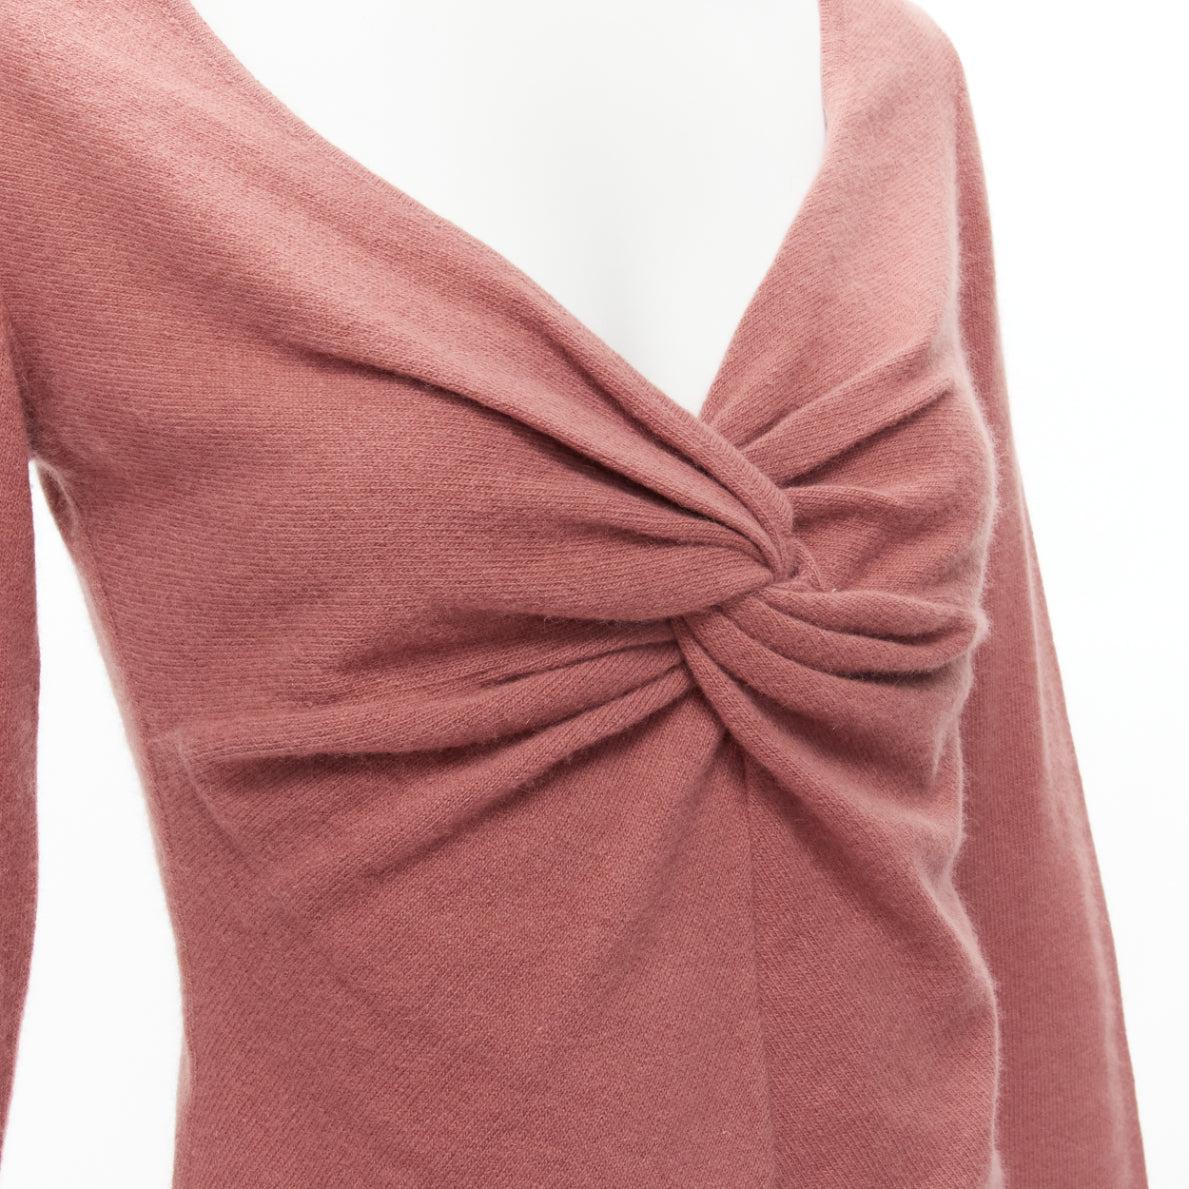 VALENTINO blush pink virgin wool blend twist front sweater top IT42 M
Reference: GIYG/A00339
Brand: Valentino
Material: Virgin Wool, Blend
Color: Pink
Pattern: Solid
Made in: Italy

CONDITION:
Condition: Excellent, this item was pre-owned and is in